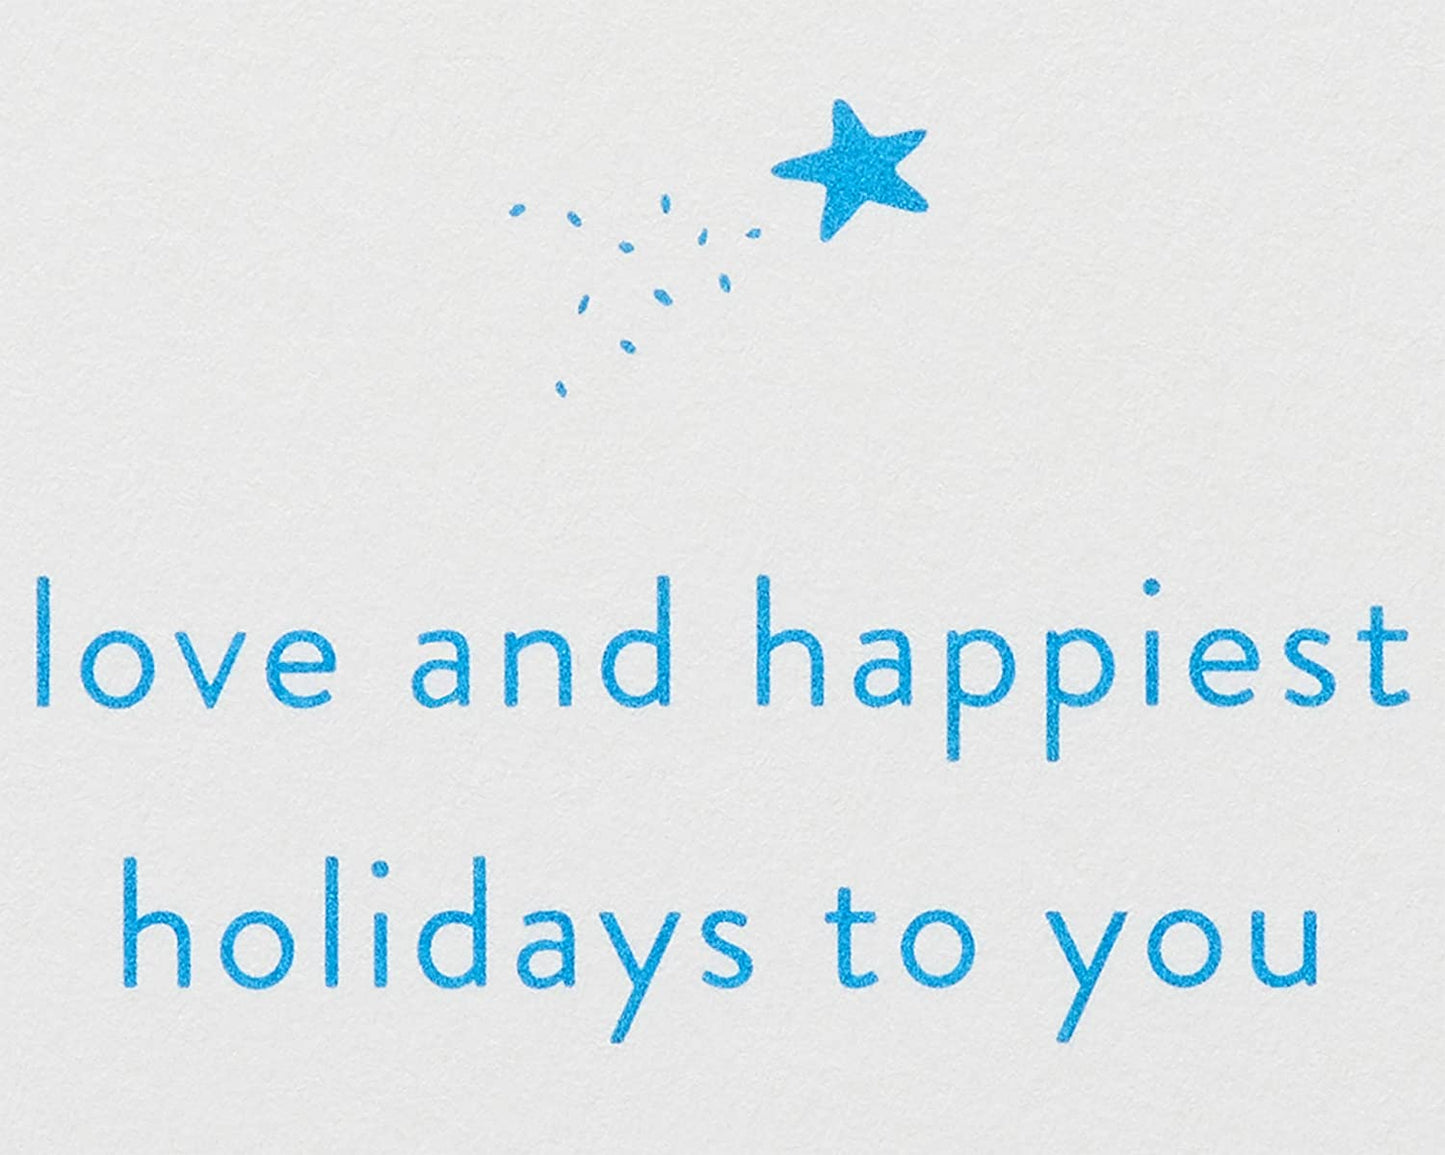 Papyrus Holiday Card (Love and Happiest Holidays)